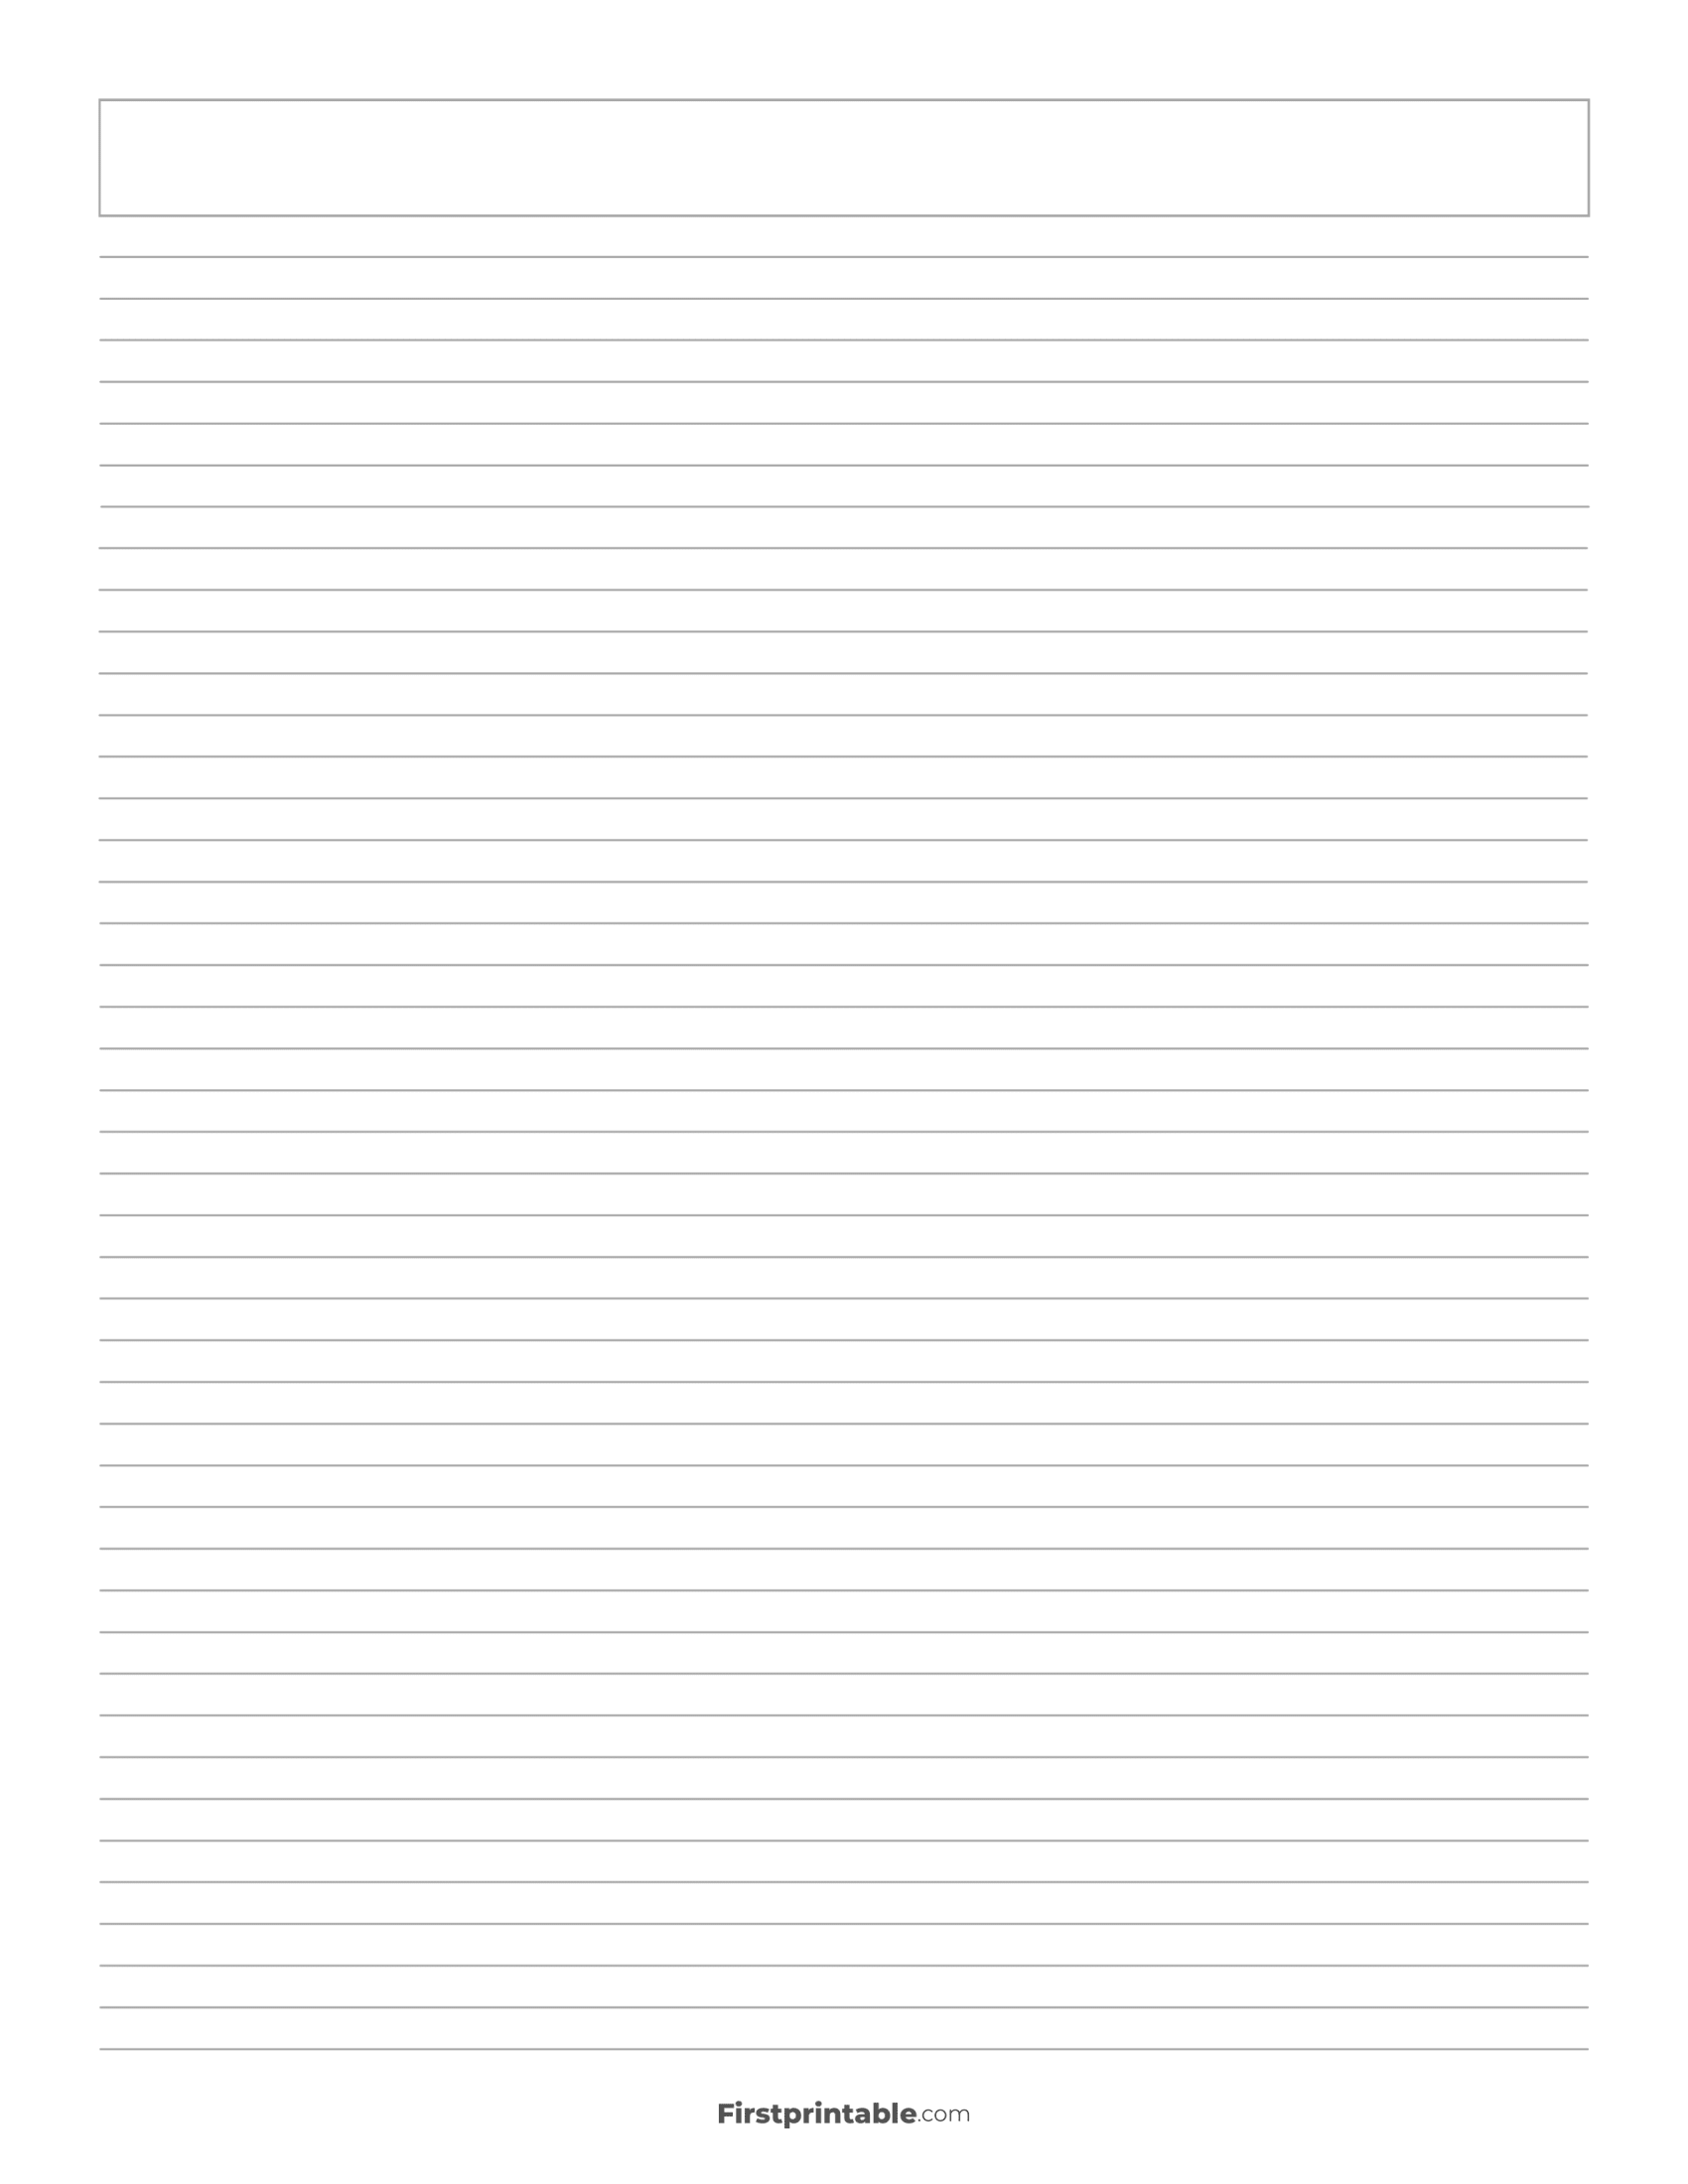 Printable Lined Paper Template - Ruled 5mm with Title 